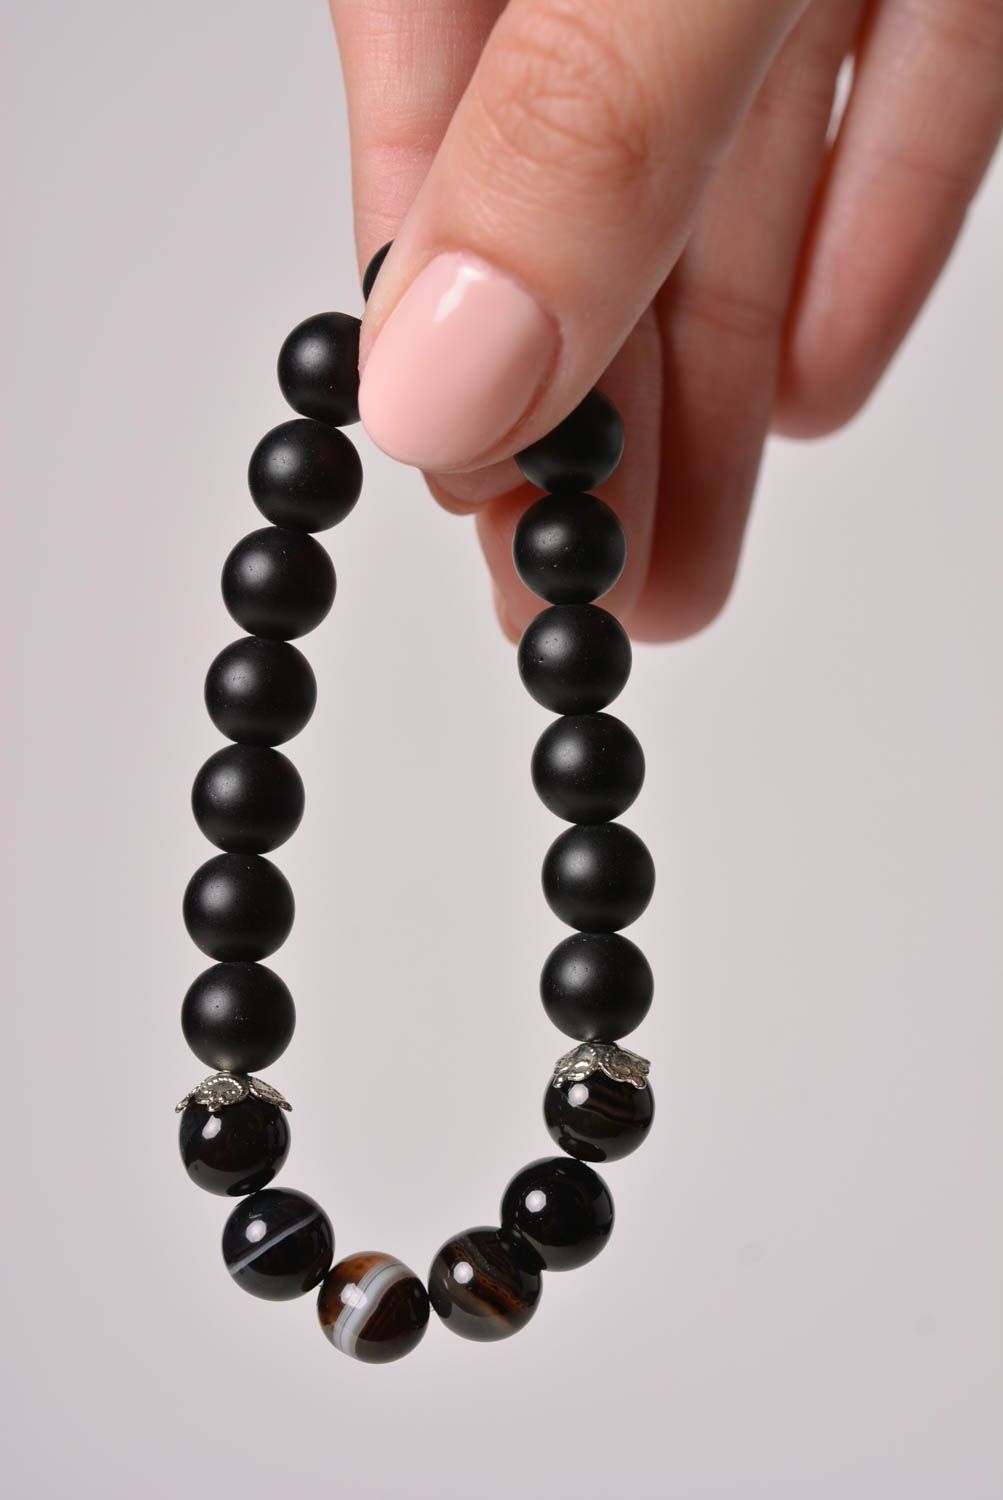 Handmade laconic wrist bracelet with natural black agate stone beads for women photo 5